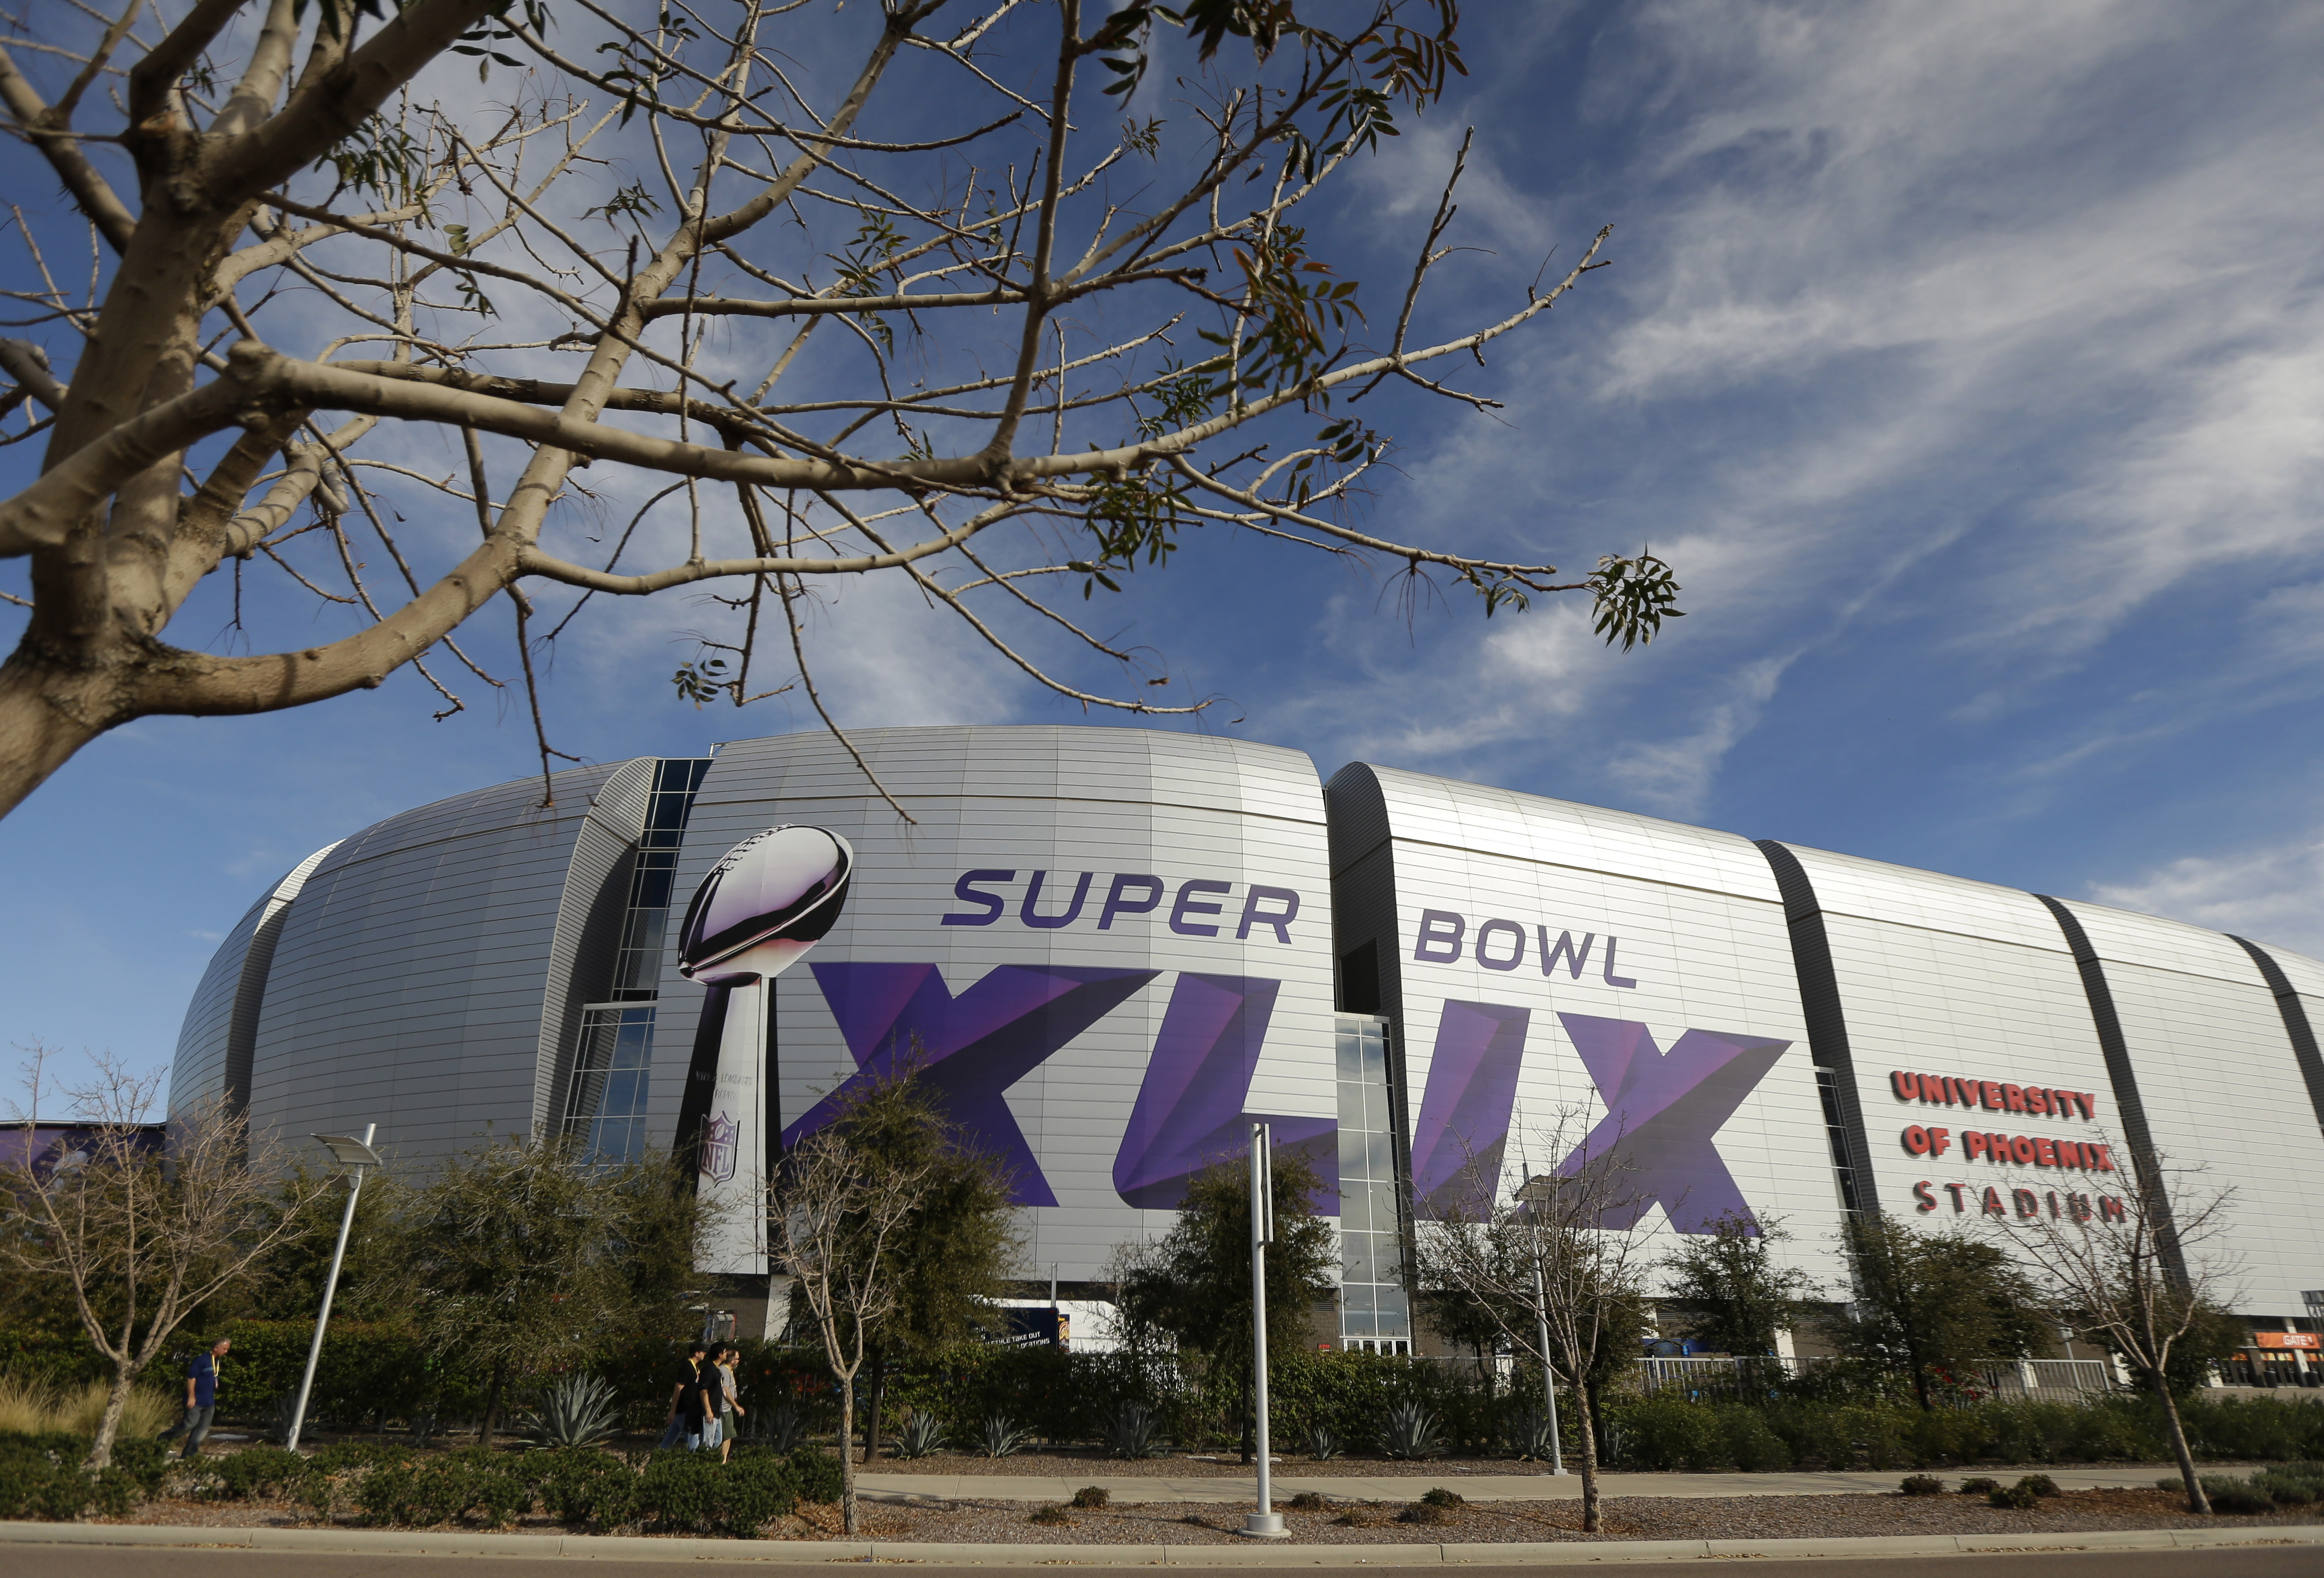 The Super Bowl XLIX logo is displayed on the University of Phoenix Stadium before the Pro Bowl Sunday, Jan. 25, 2015, in Glendale, Ariz. The venue will also host Super Bowl XLIX between the New England Patriots and the Seattle Seahawks on Sunday, Feb. 1, 2015. (AP Photo/Charlie Riedel)